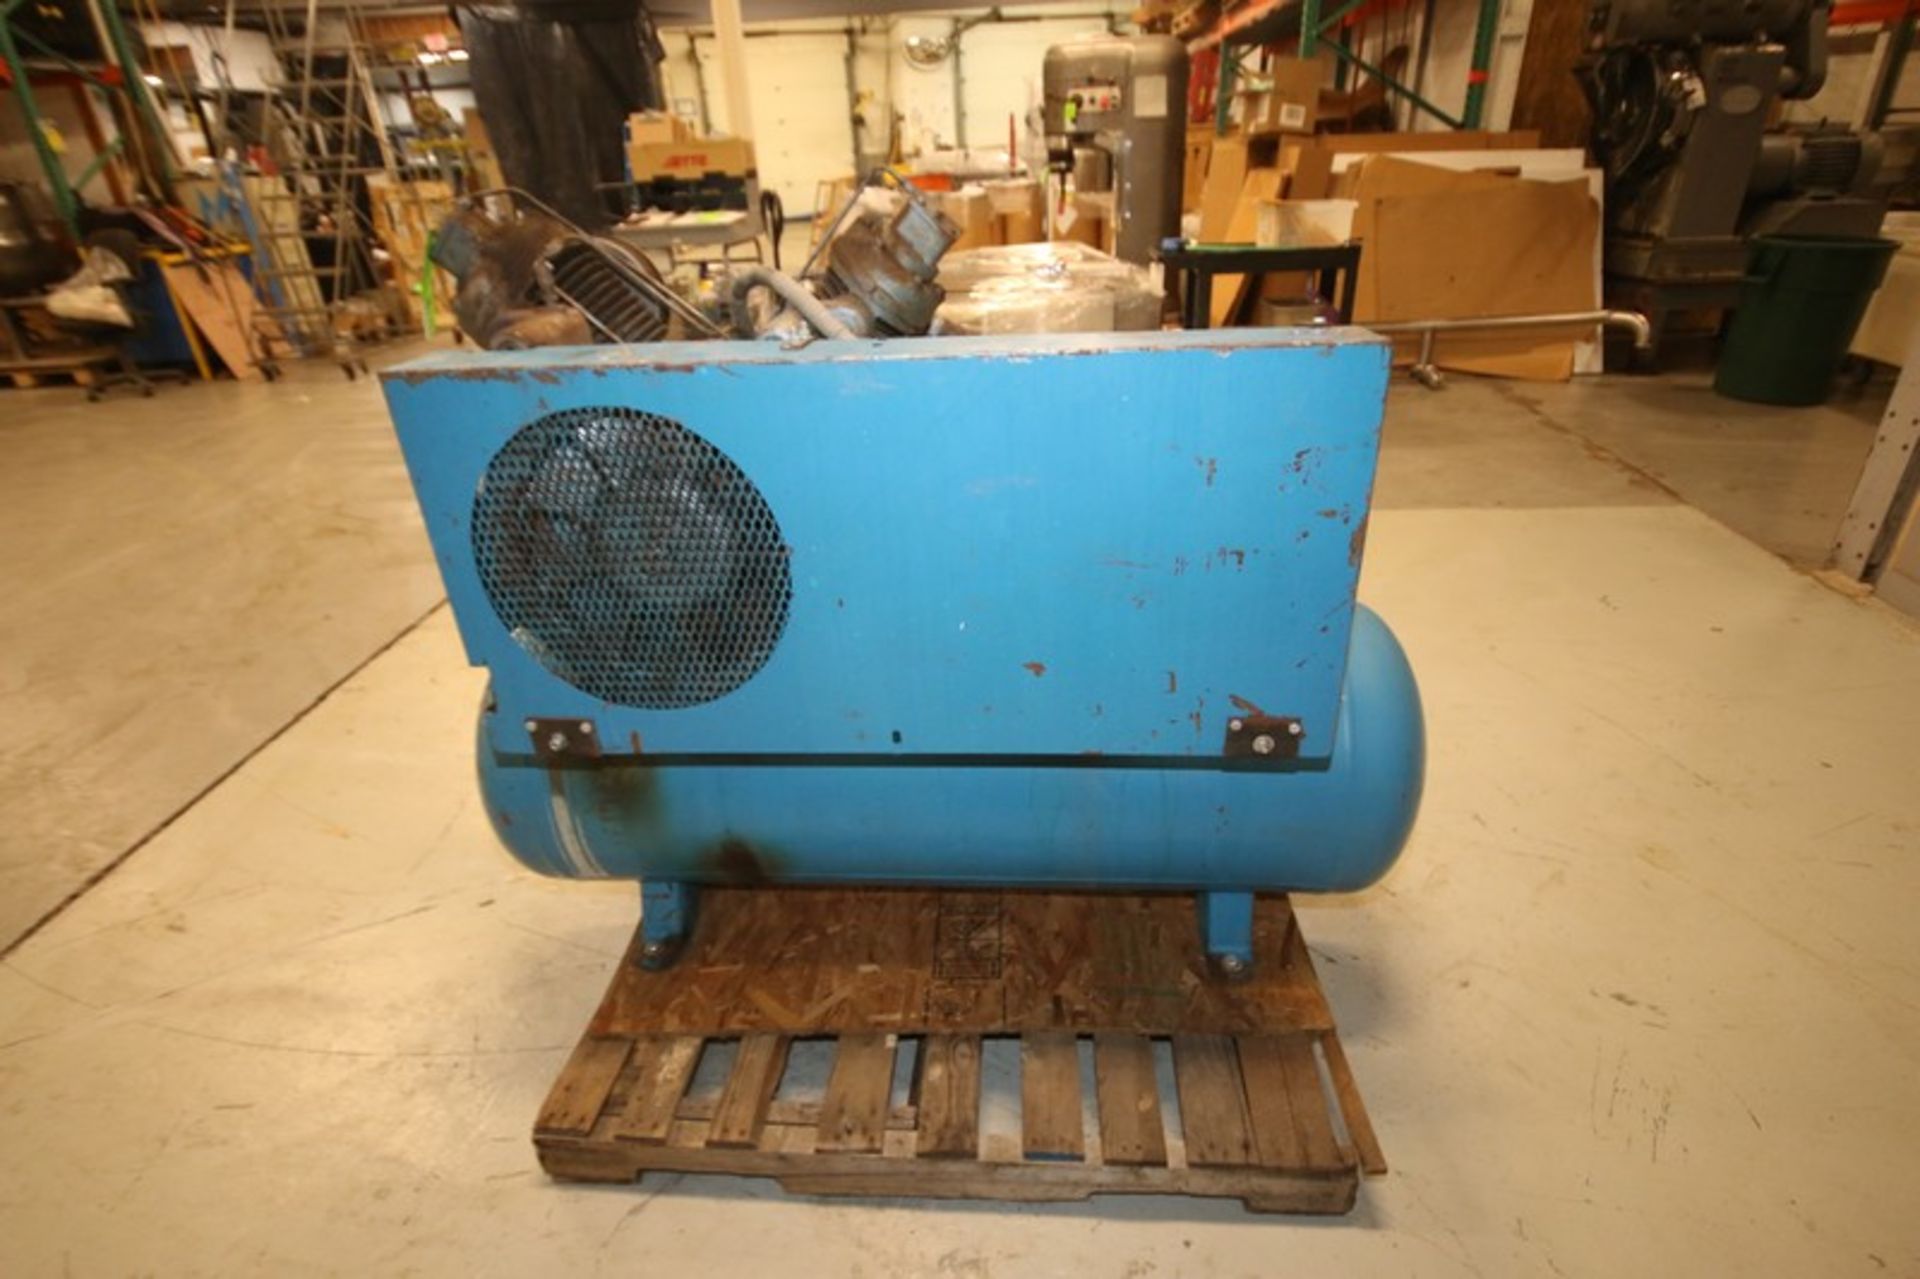 Ingersoll Rand 10 hp Reciprocating Air Compressor,Model 71T4, SN 276537, 1740 rpm, 230/460V, Mounted - Image 6 of 7